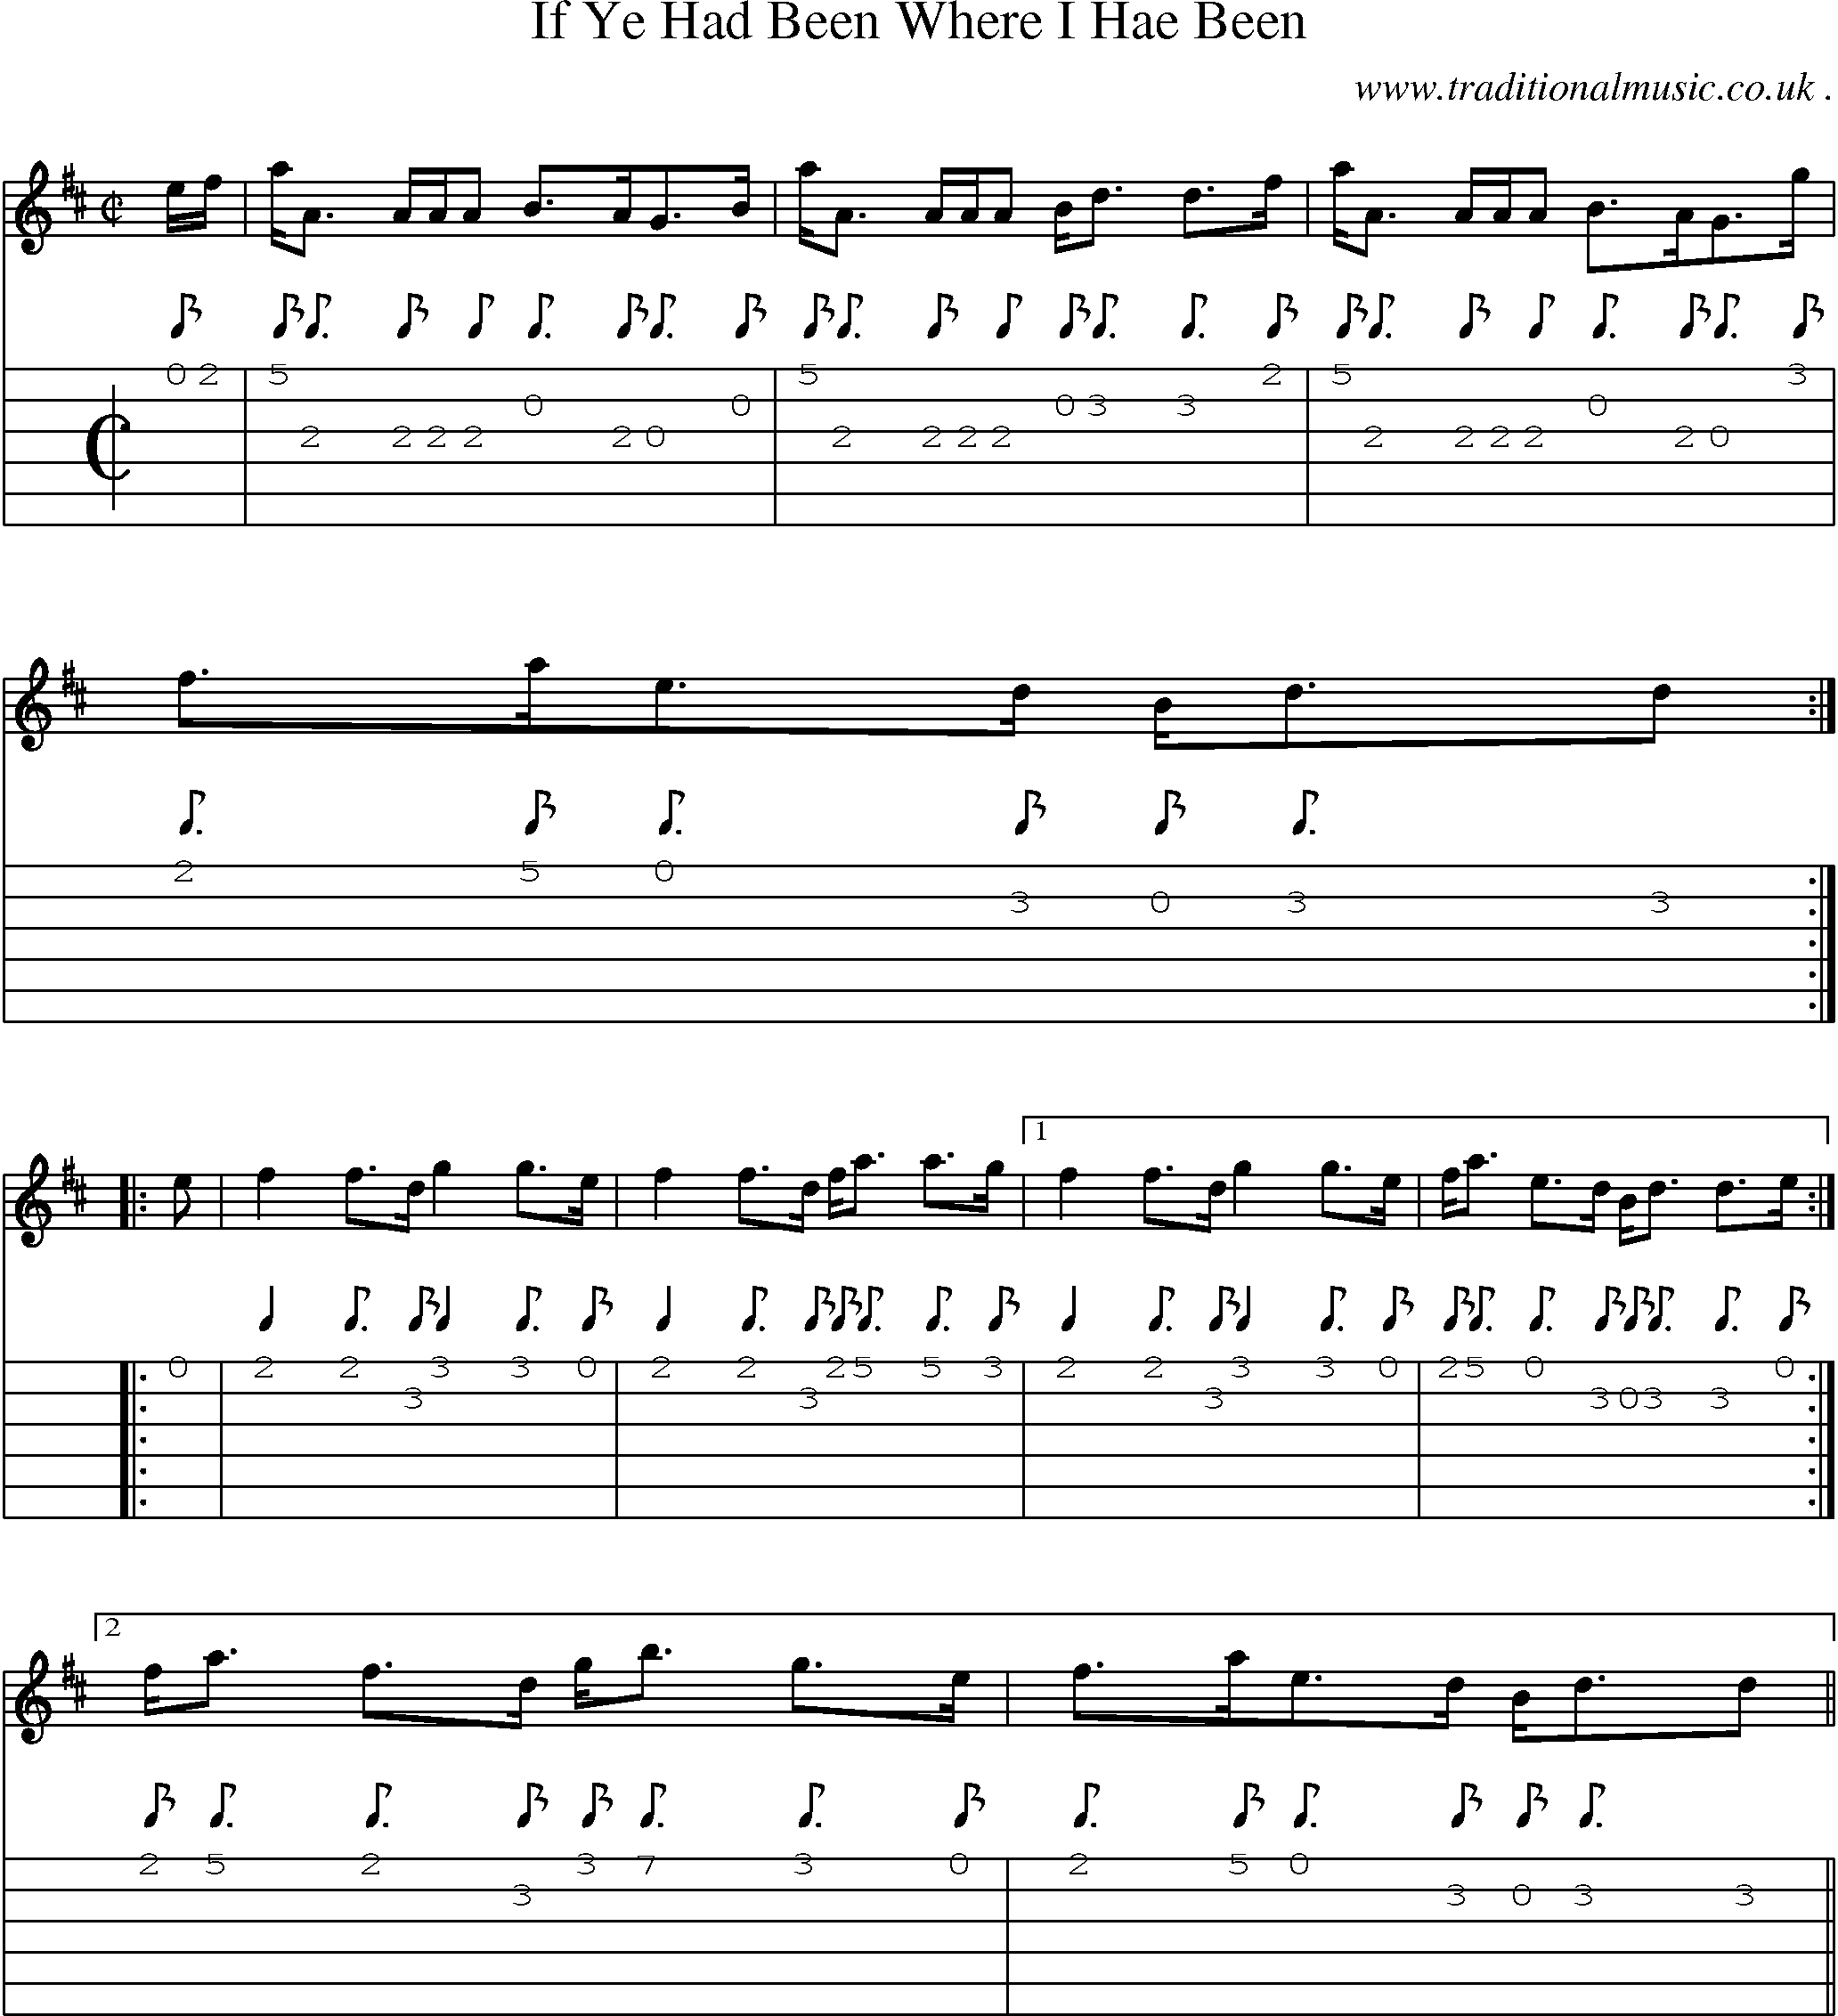 Sheet-music  score, Chords and Guitar Tabs for If Ye Had Been Where I Hae Been